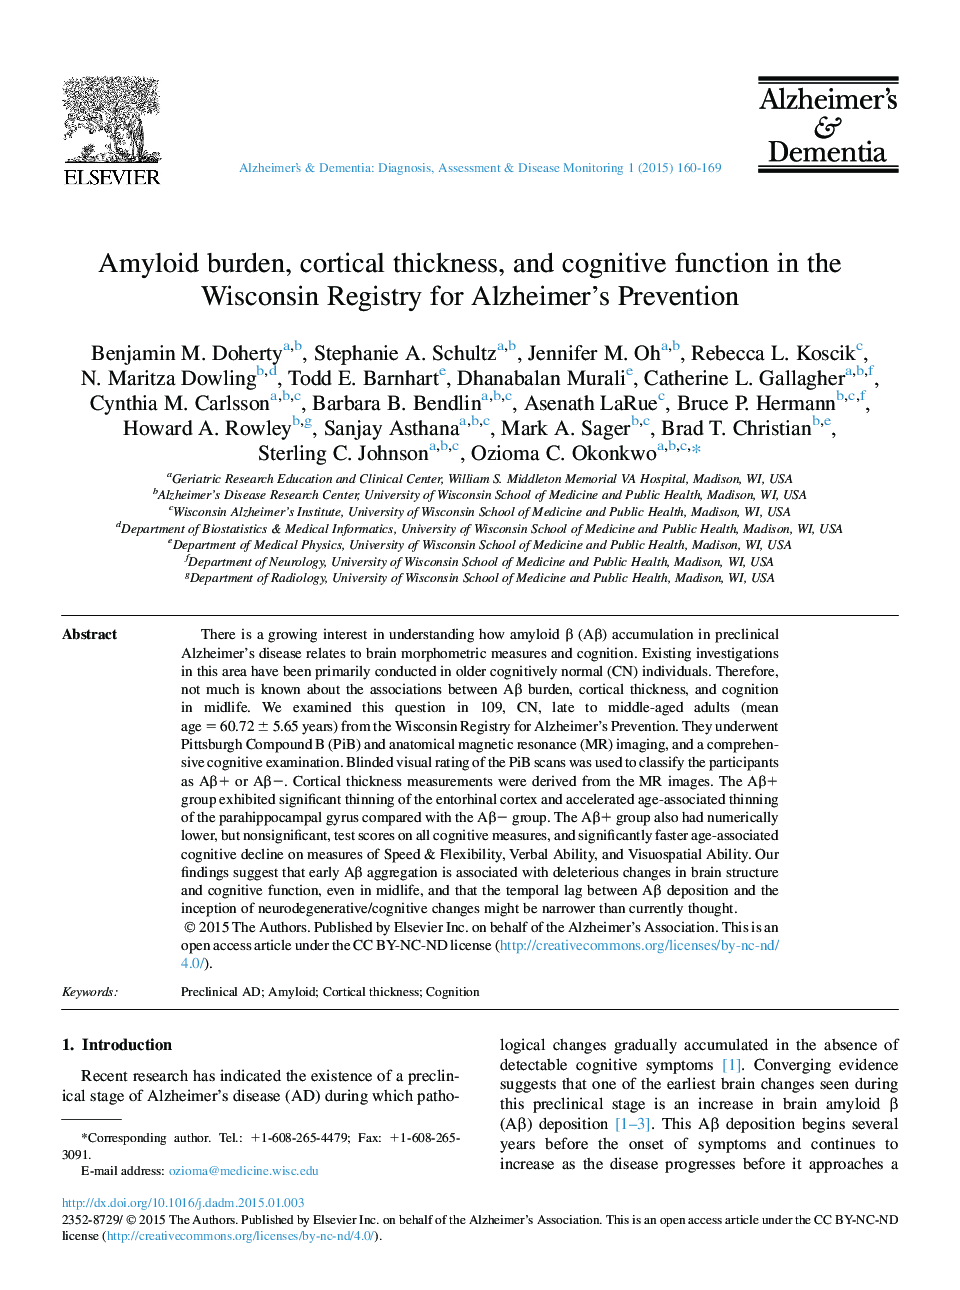 Amyloid burden, cortical thickness, and cognitive function in the Wisconsin Registry for Alzheimer's Prevention